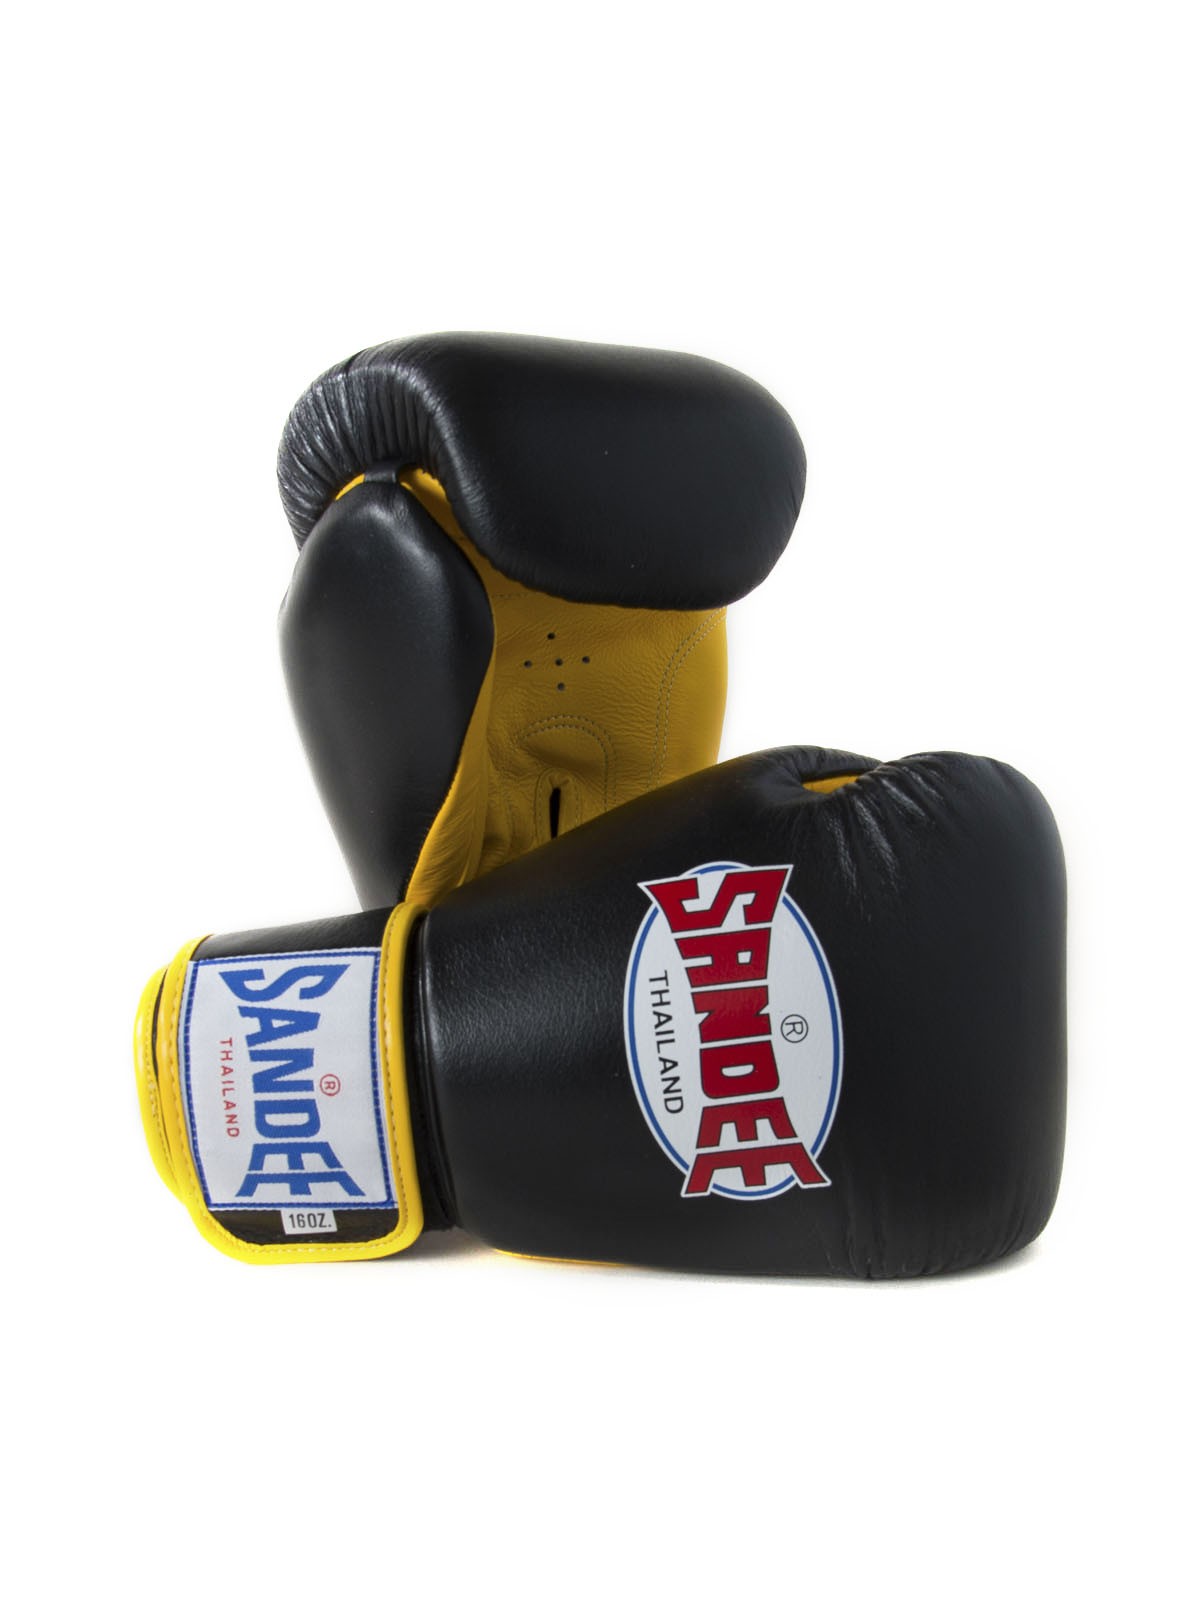 Details about   Sandee Boxing Gloves Authentic Leather Black Yellow Muay Thai Kickboxing MMA